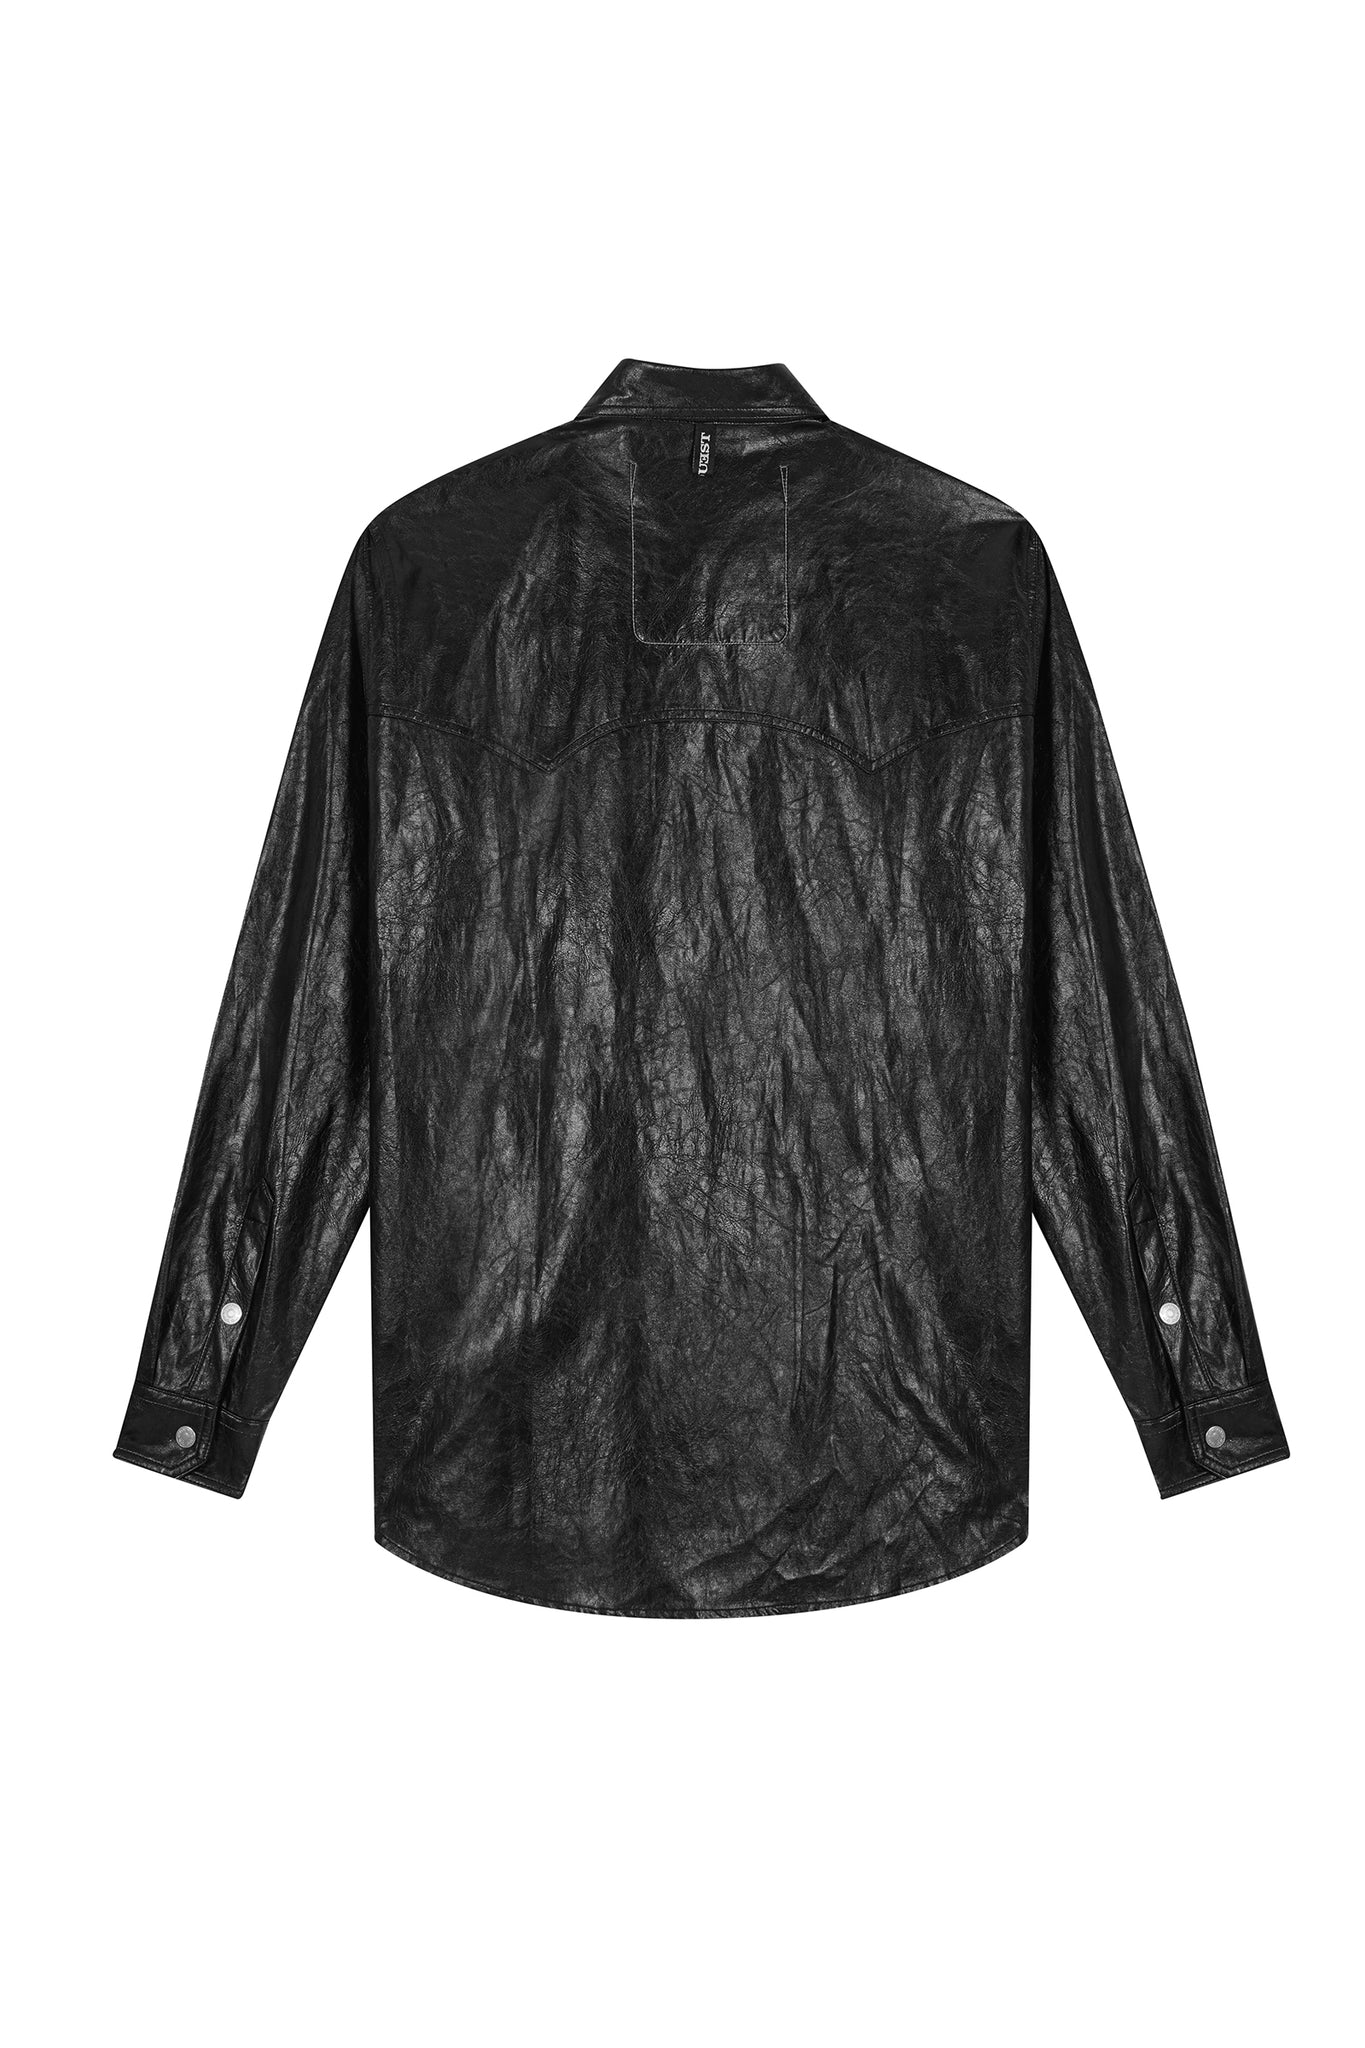 THE WESTERN SHIRT IN BLACK FAUX LEATHER